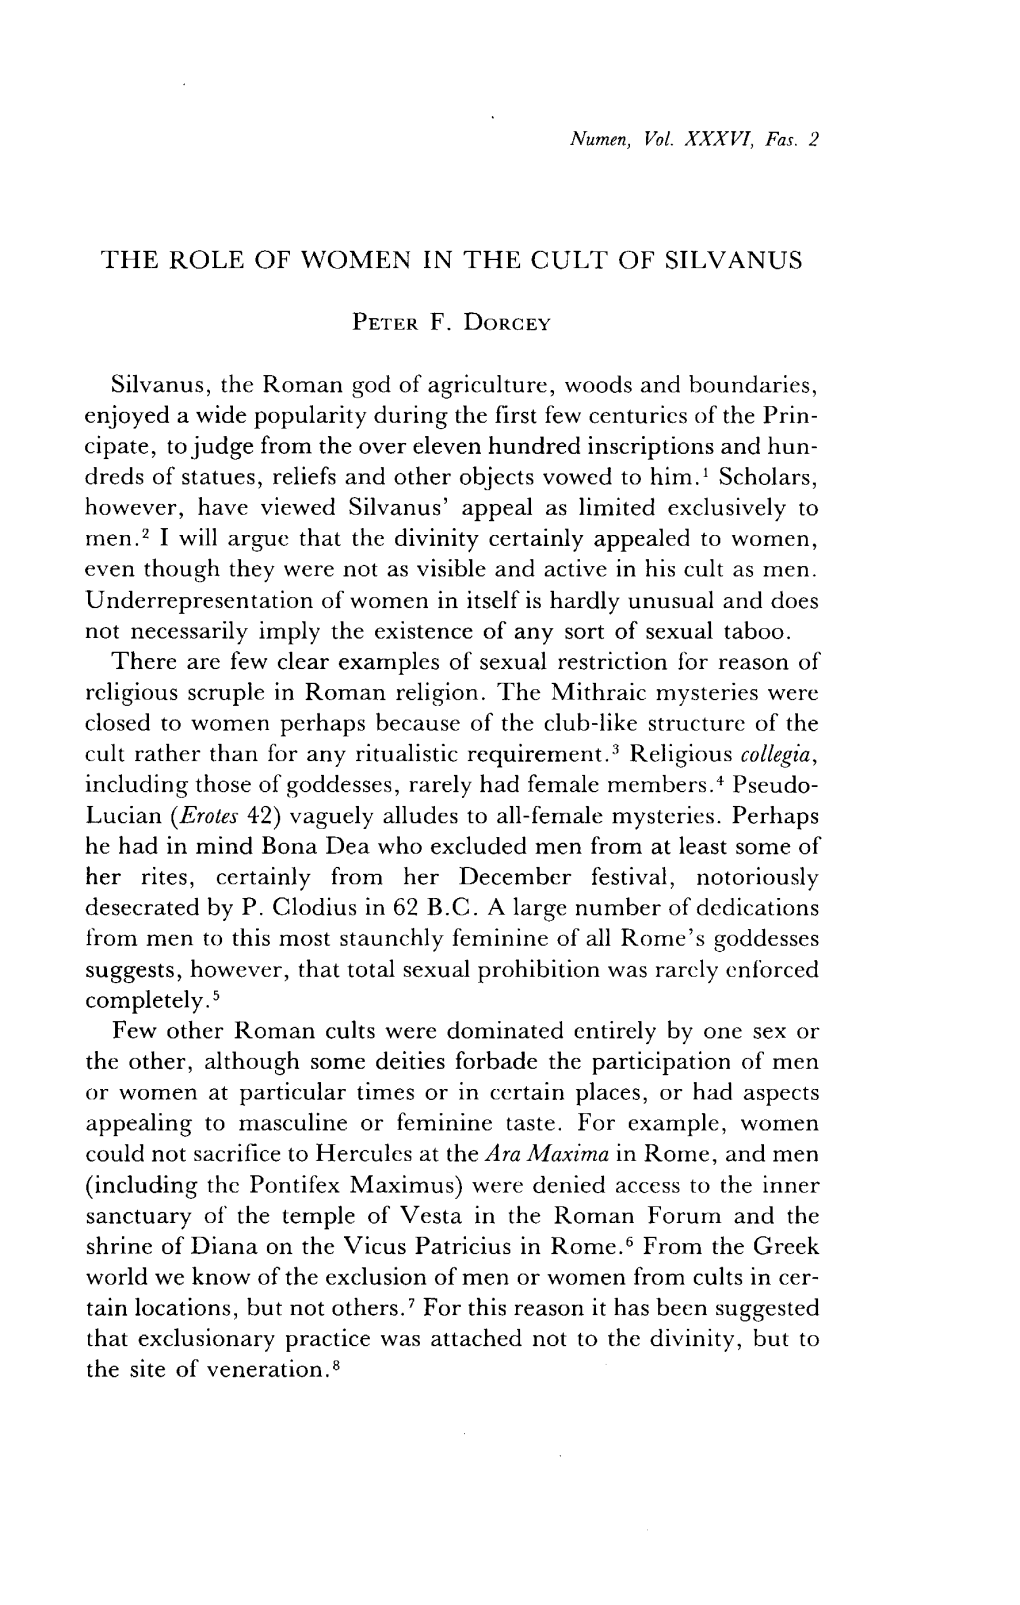 The Role of Women in the Cult of Silvanus Peter F. Dorcey